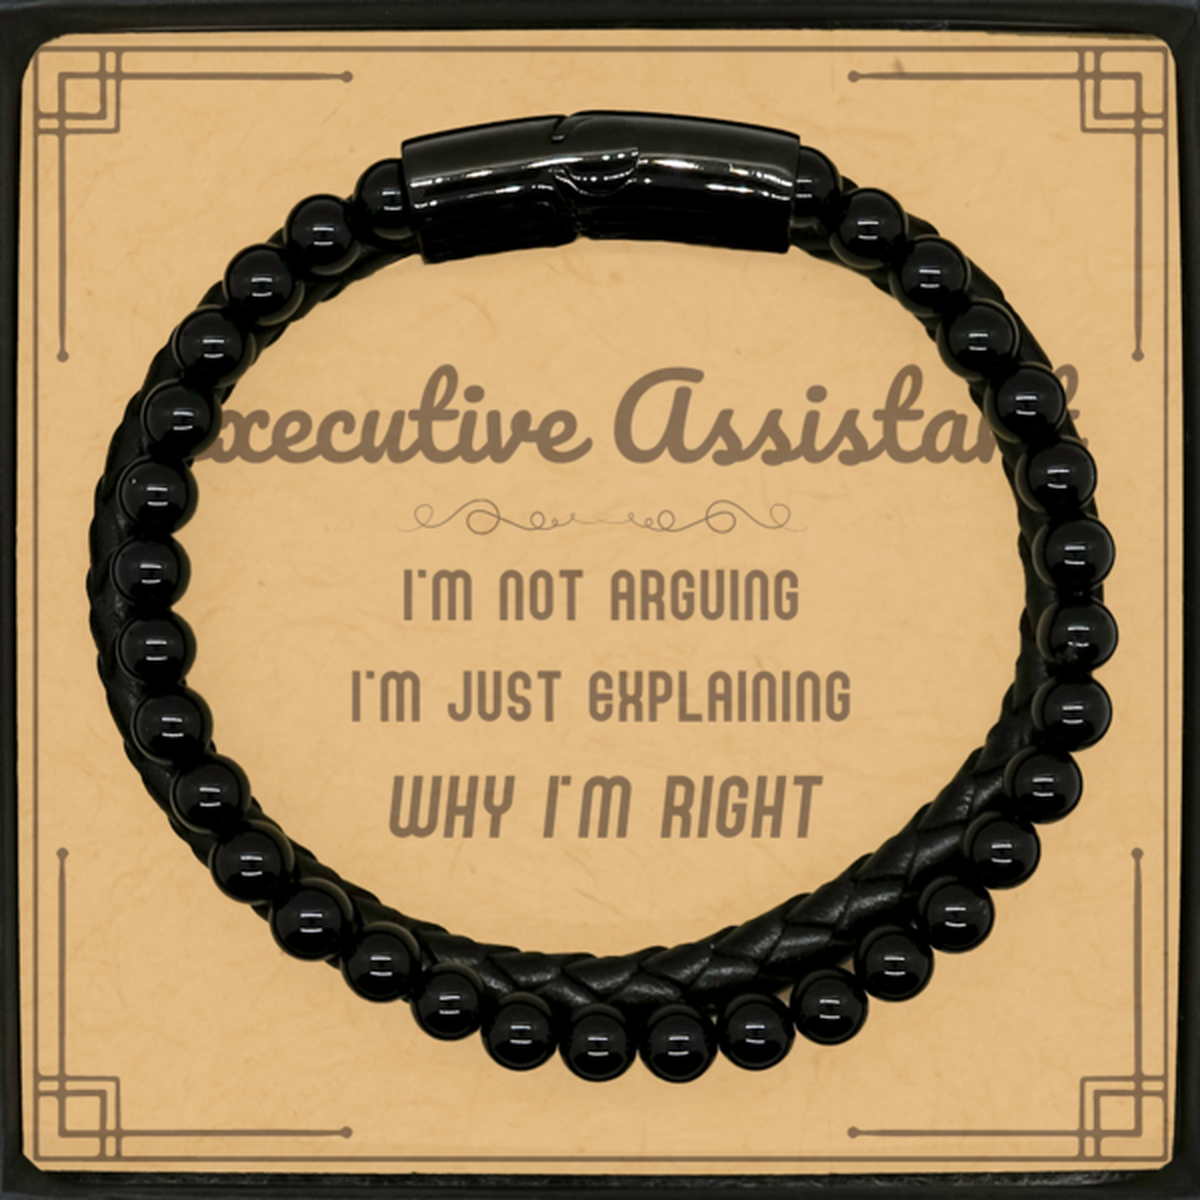 Executive Assistant I'm not Arguing. I'm Just Explaining Why I'm RIGHT Stone Leather Bracelets, Funny Saying Quote Executive Assistant Gifts For Executive Assistant Message Card Graduation Birthday Christmas Gifts for Men Women Coworker